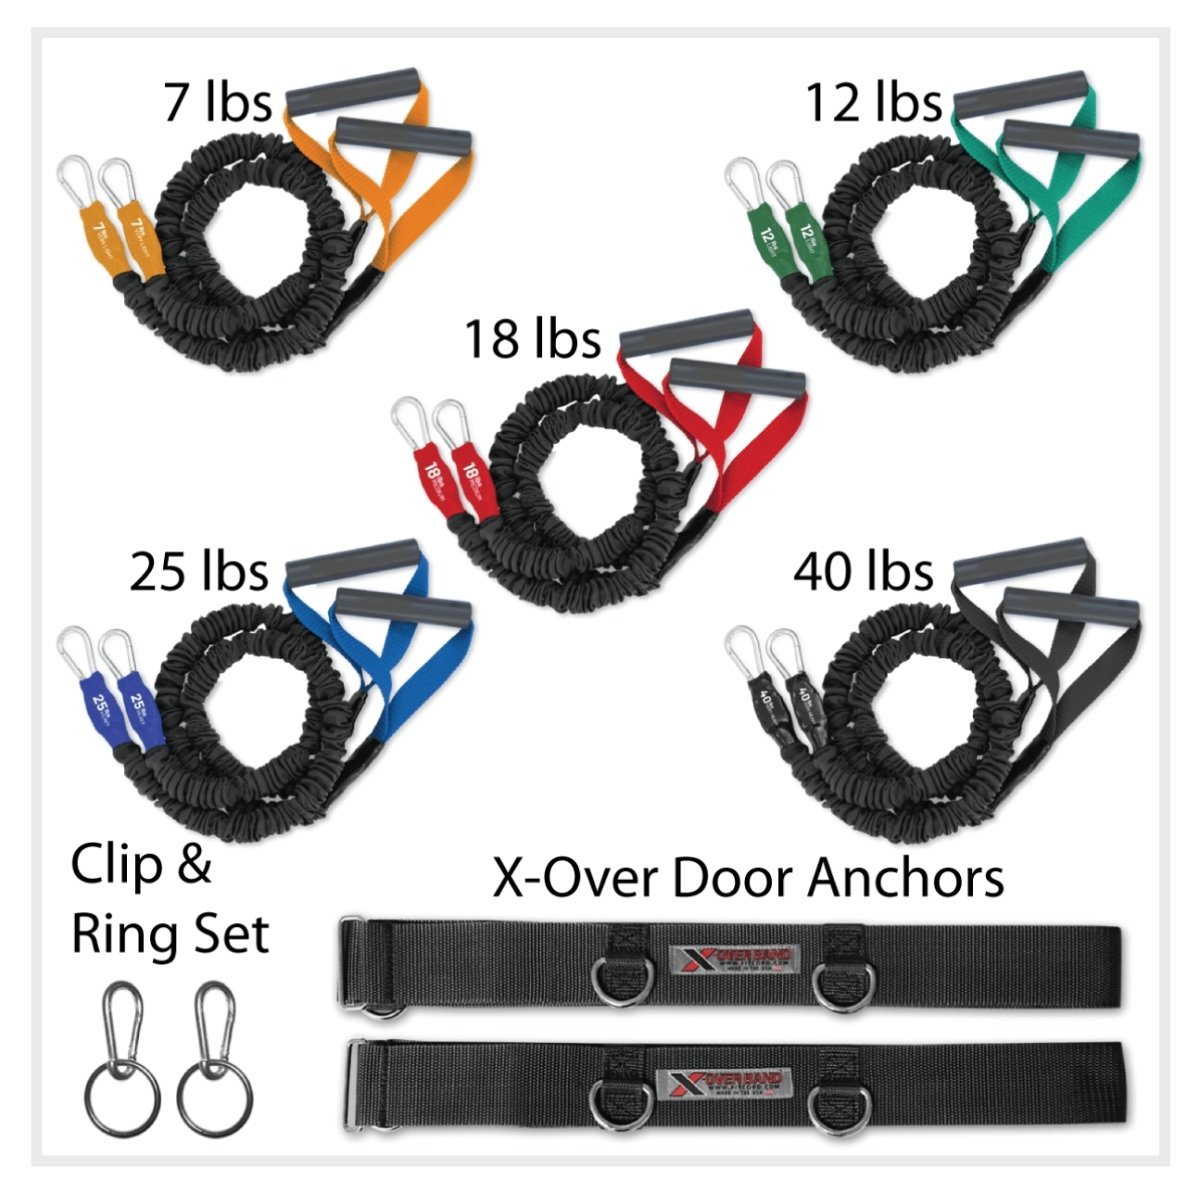 X-Over Cable Crossover Cord Home Gym Bundle- Athlete best resistance bands made in USA and covered for safety - FitCord Resistance Bands